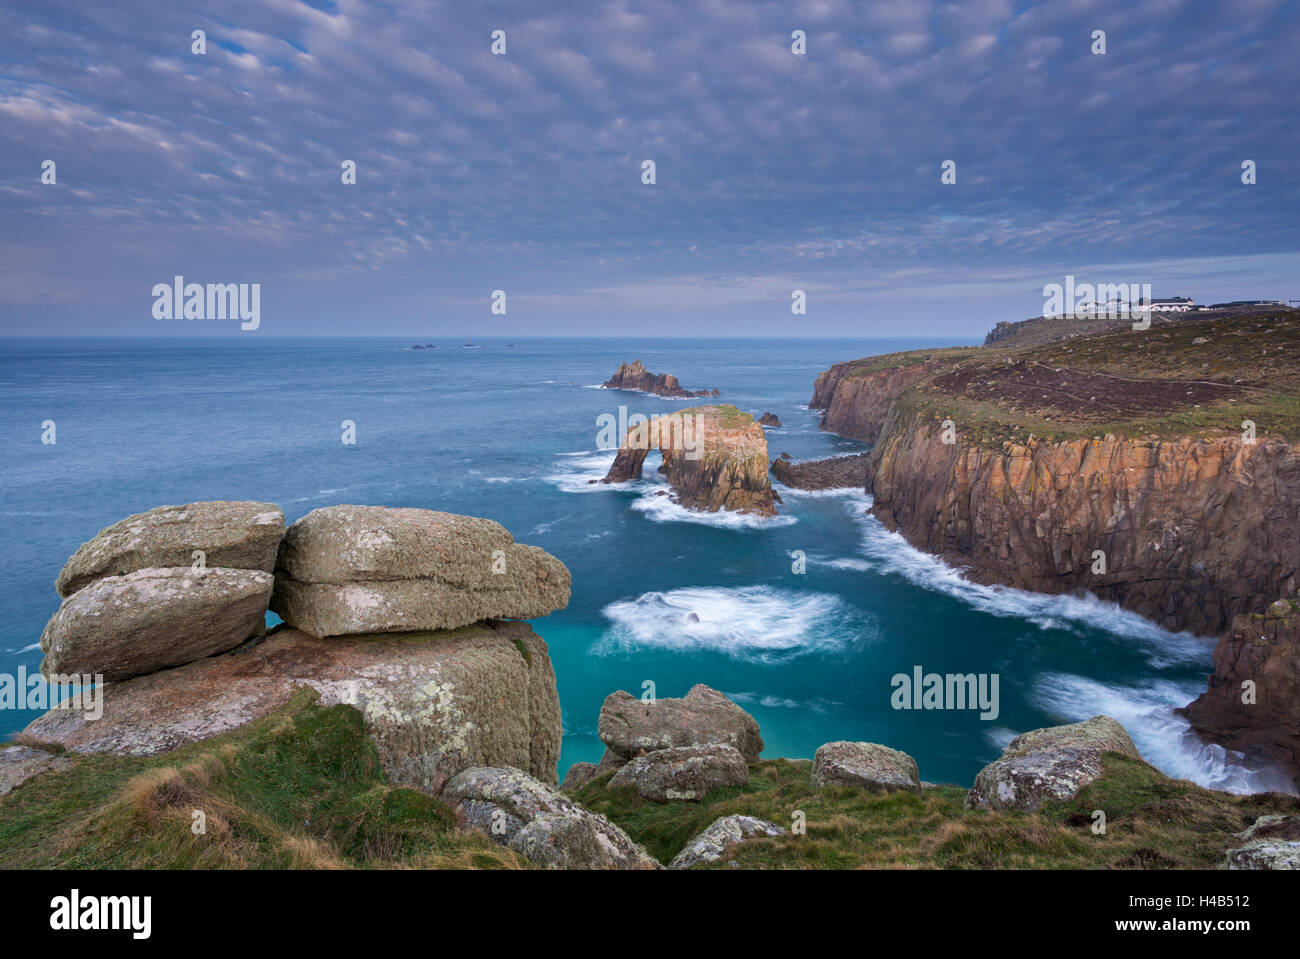 Dramatic coastal scenery at Land's End in West Cornwall, England. Winter (February) 2013. Stock Photo